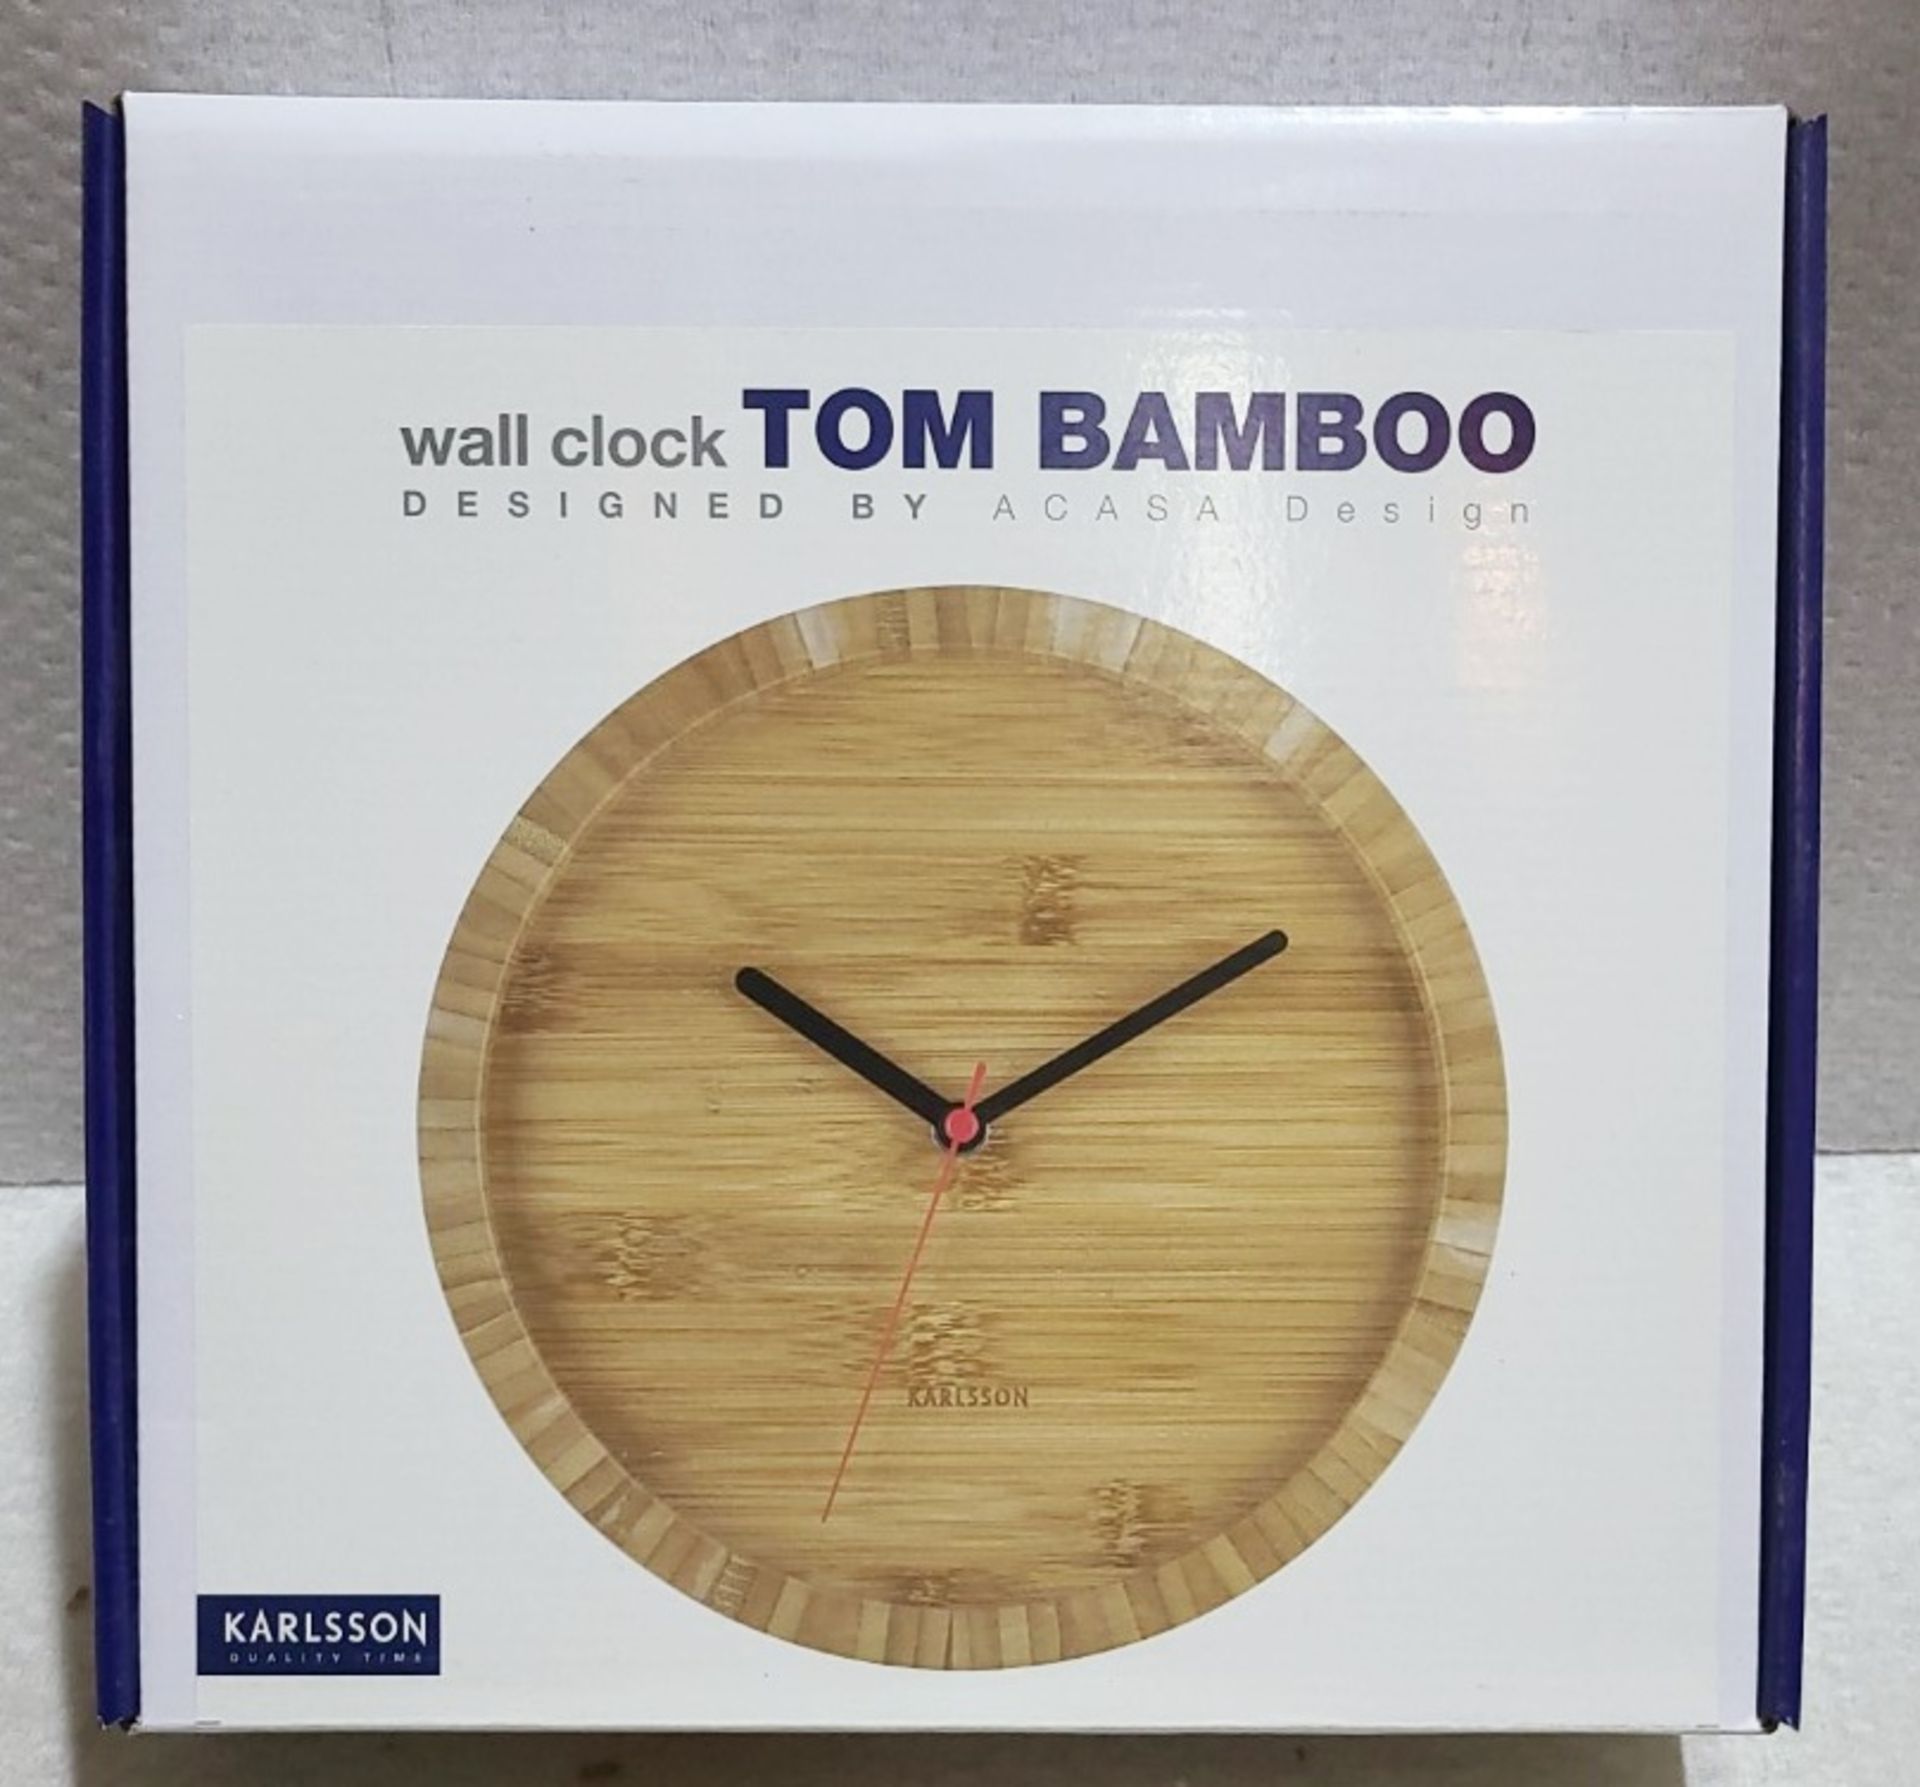 1 x KARLSSON Tom Bamboo Natural Numberless Wall Clock 26cm - New Boxed Stock - Image 4 of 7